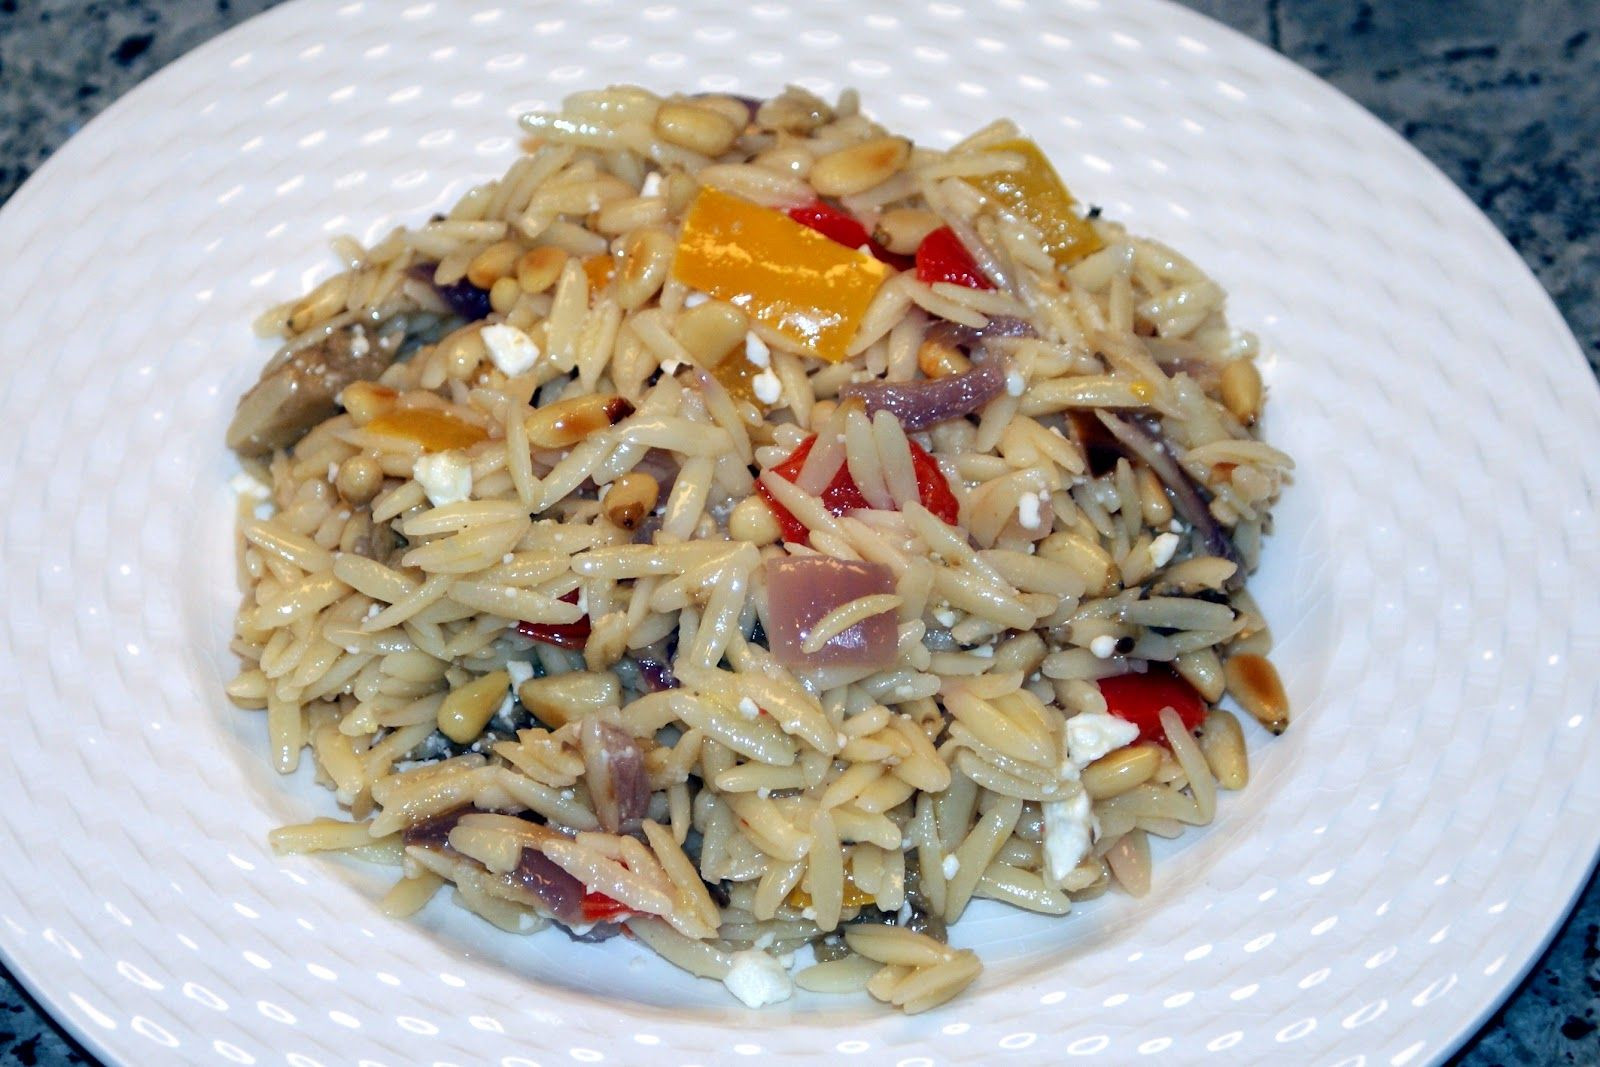 Roasted Vegetables Barefoot Contessa
 Orzo with Roasted Ve ables The Barefoot Contessa via